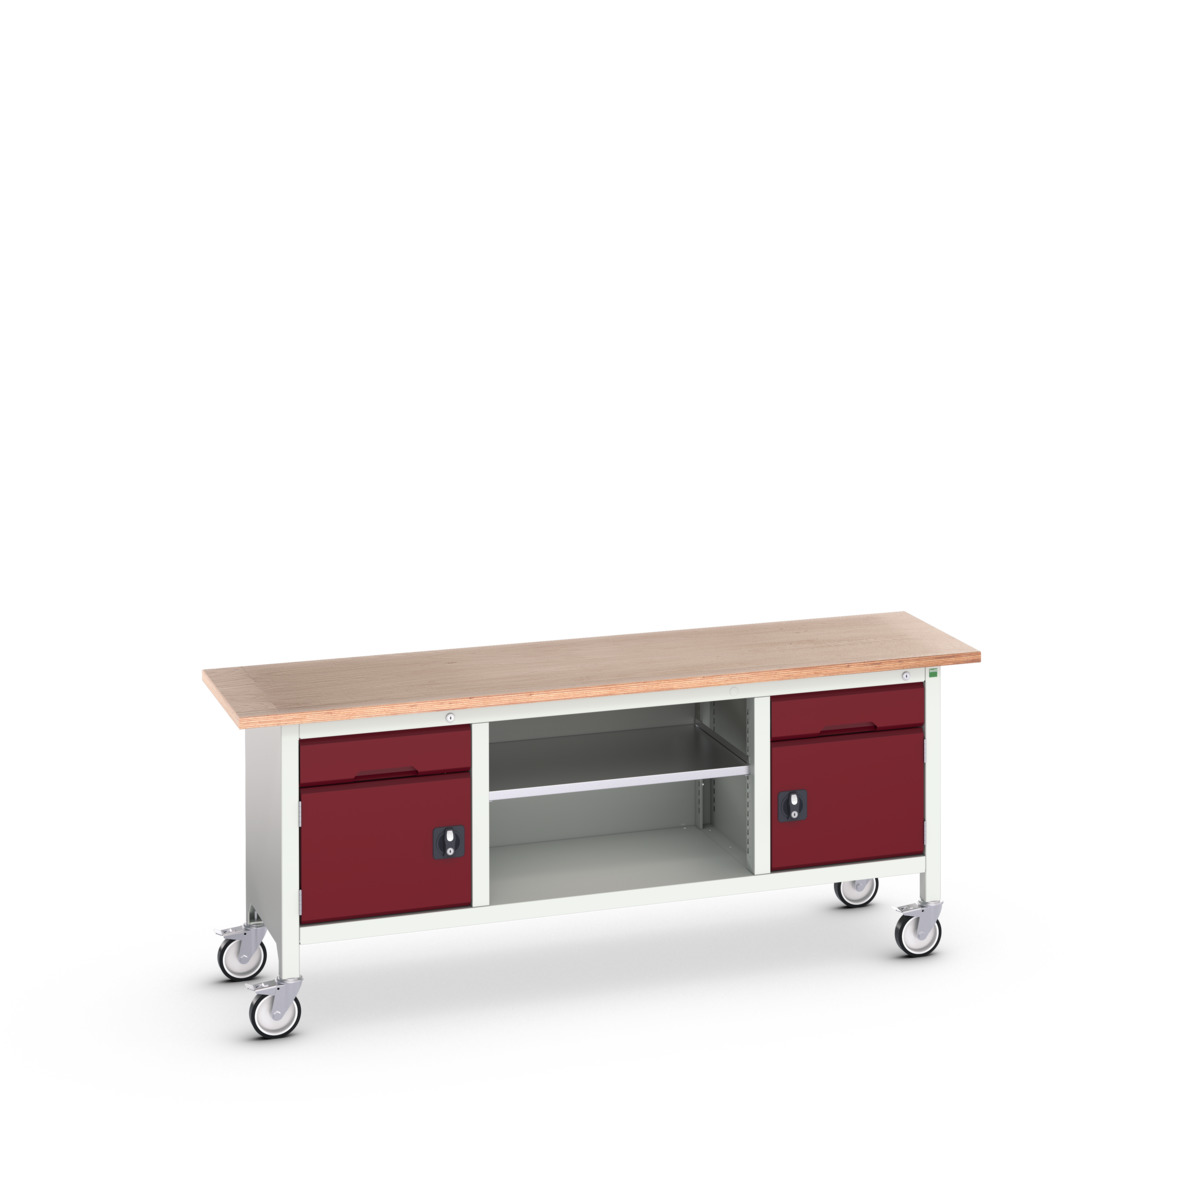 16923231.24 - verso mobile storage bench (mpx)